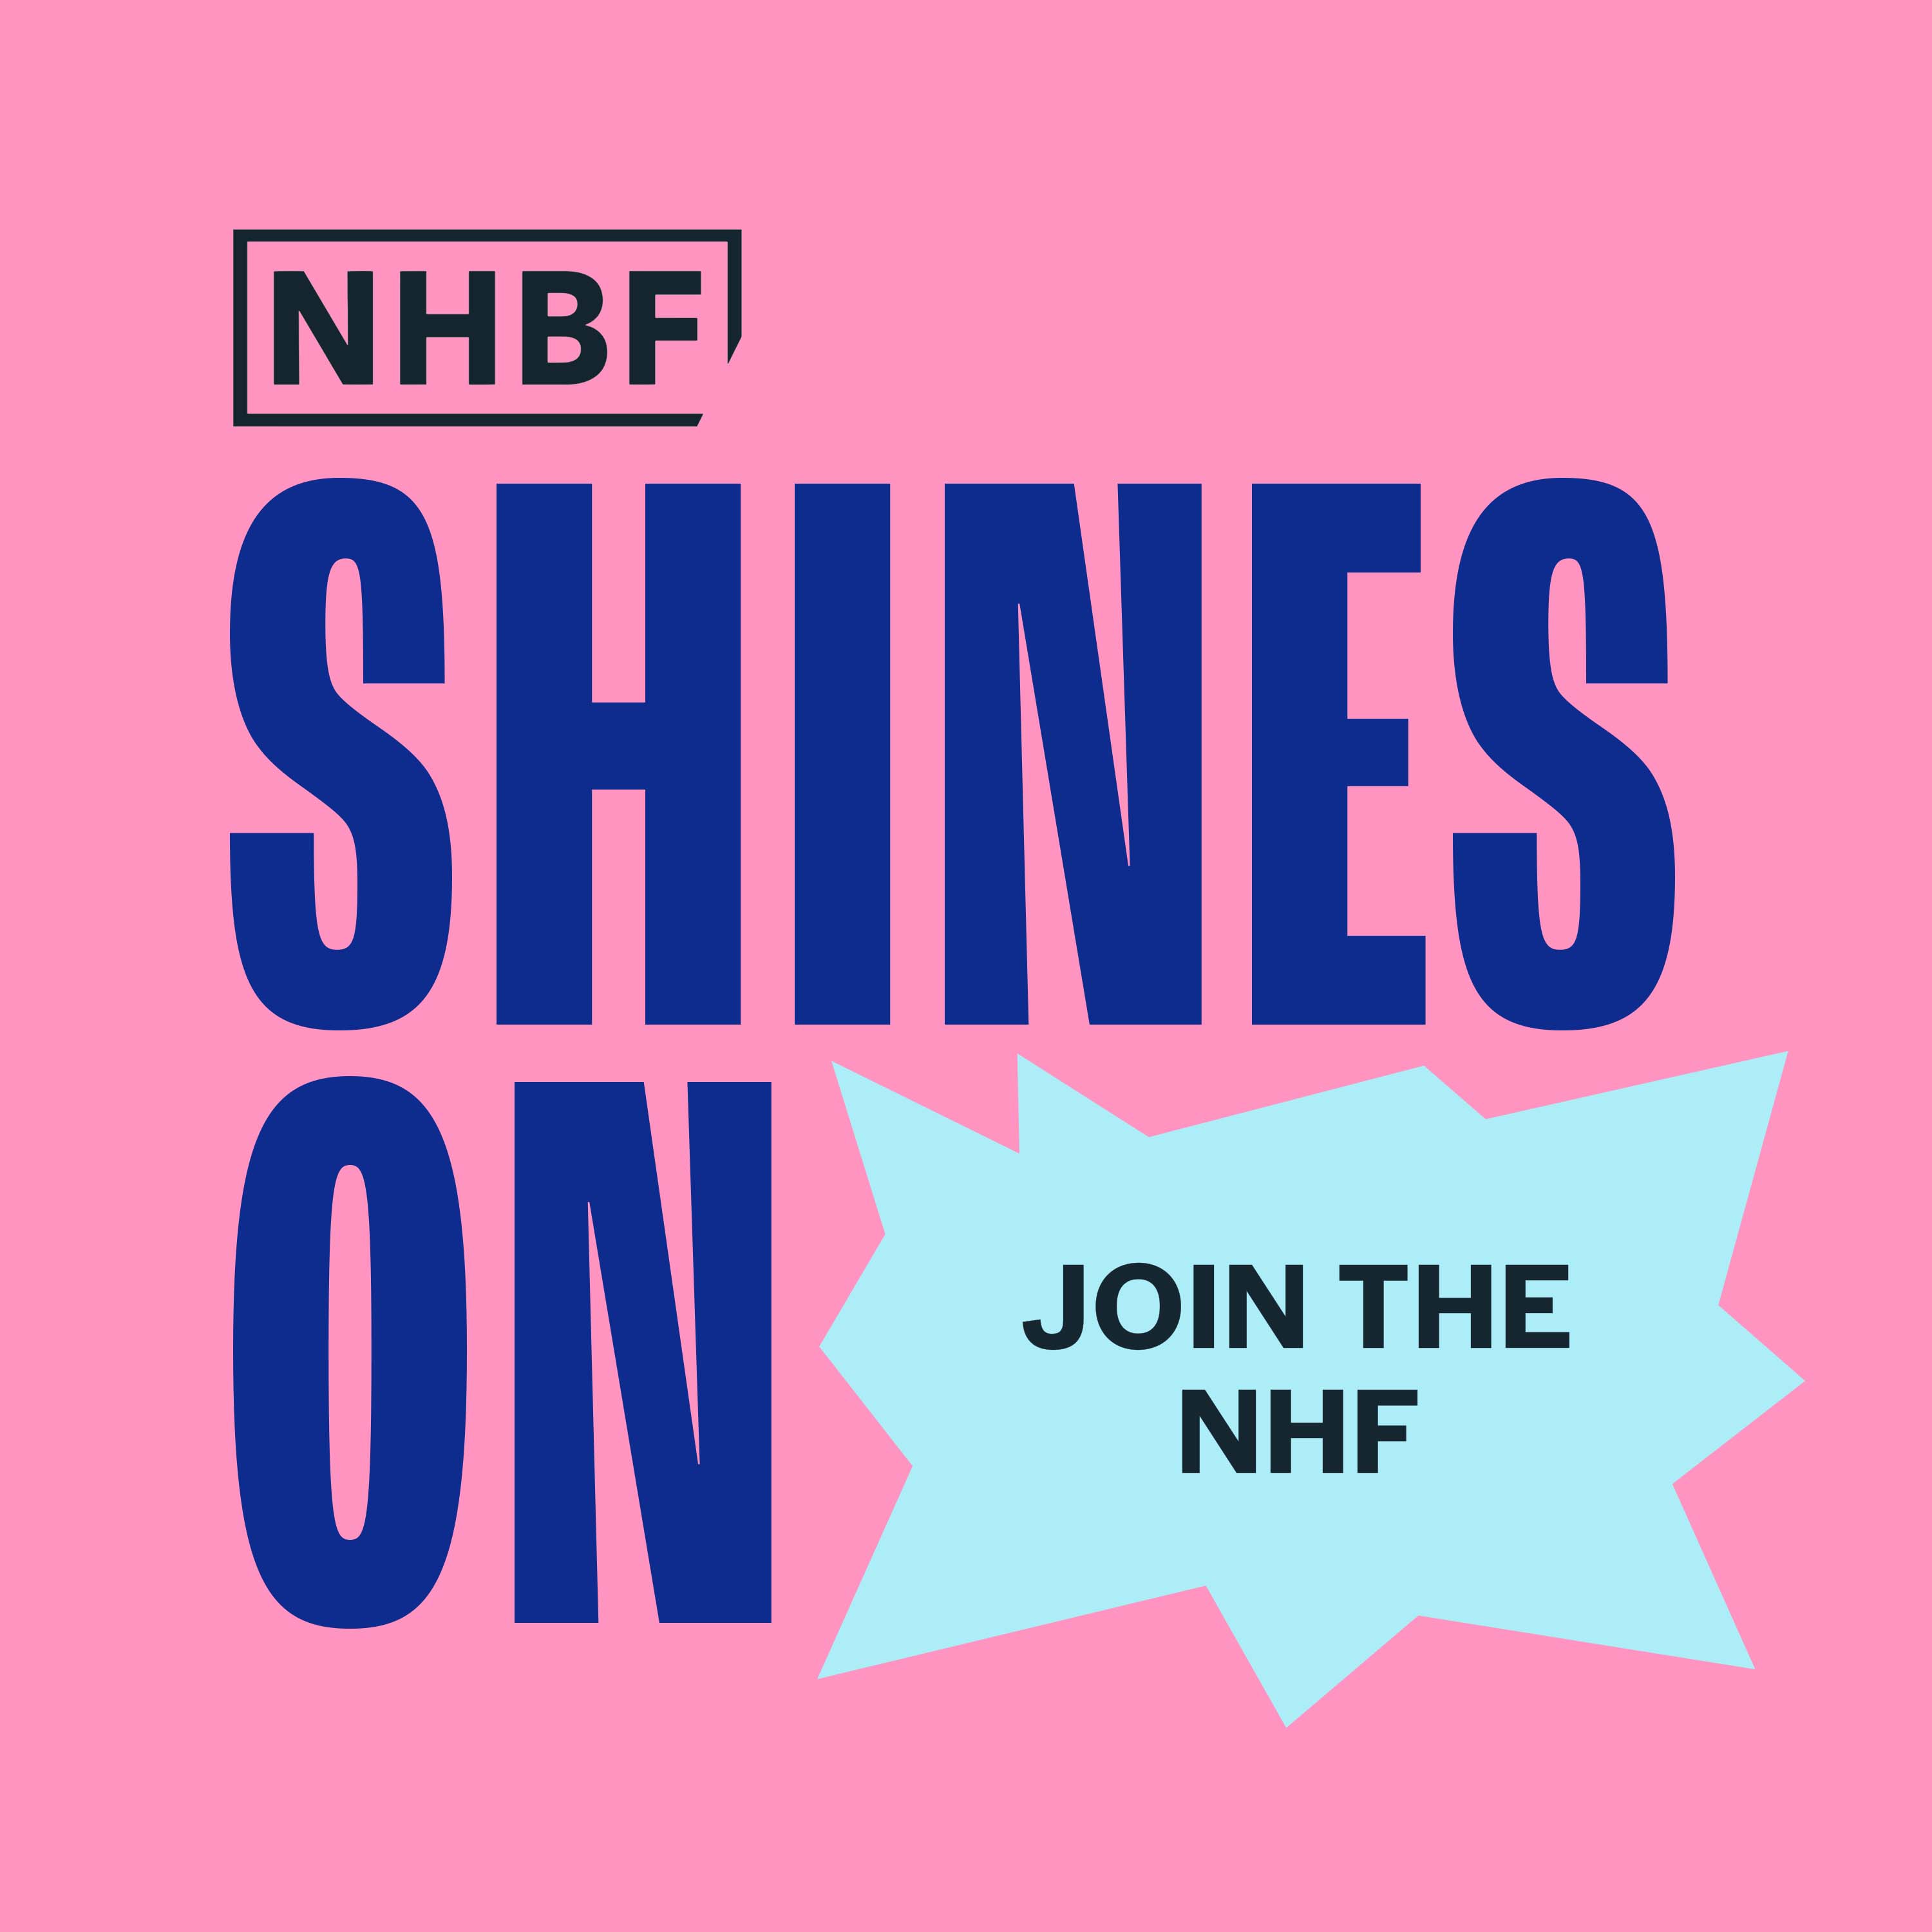 Join the NHBF